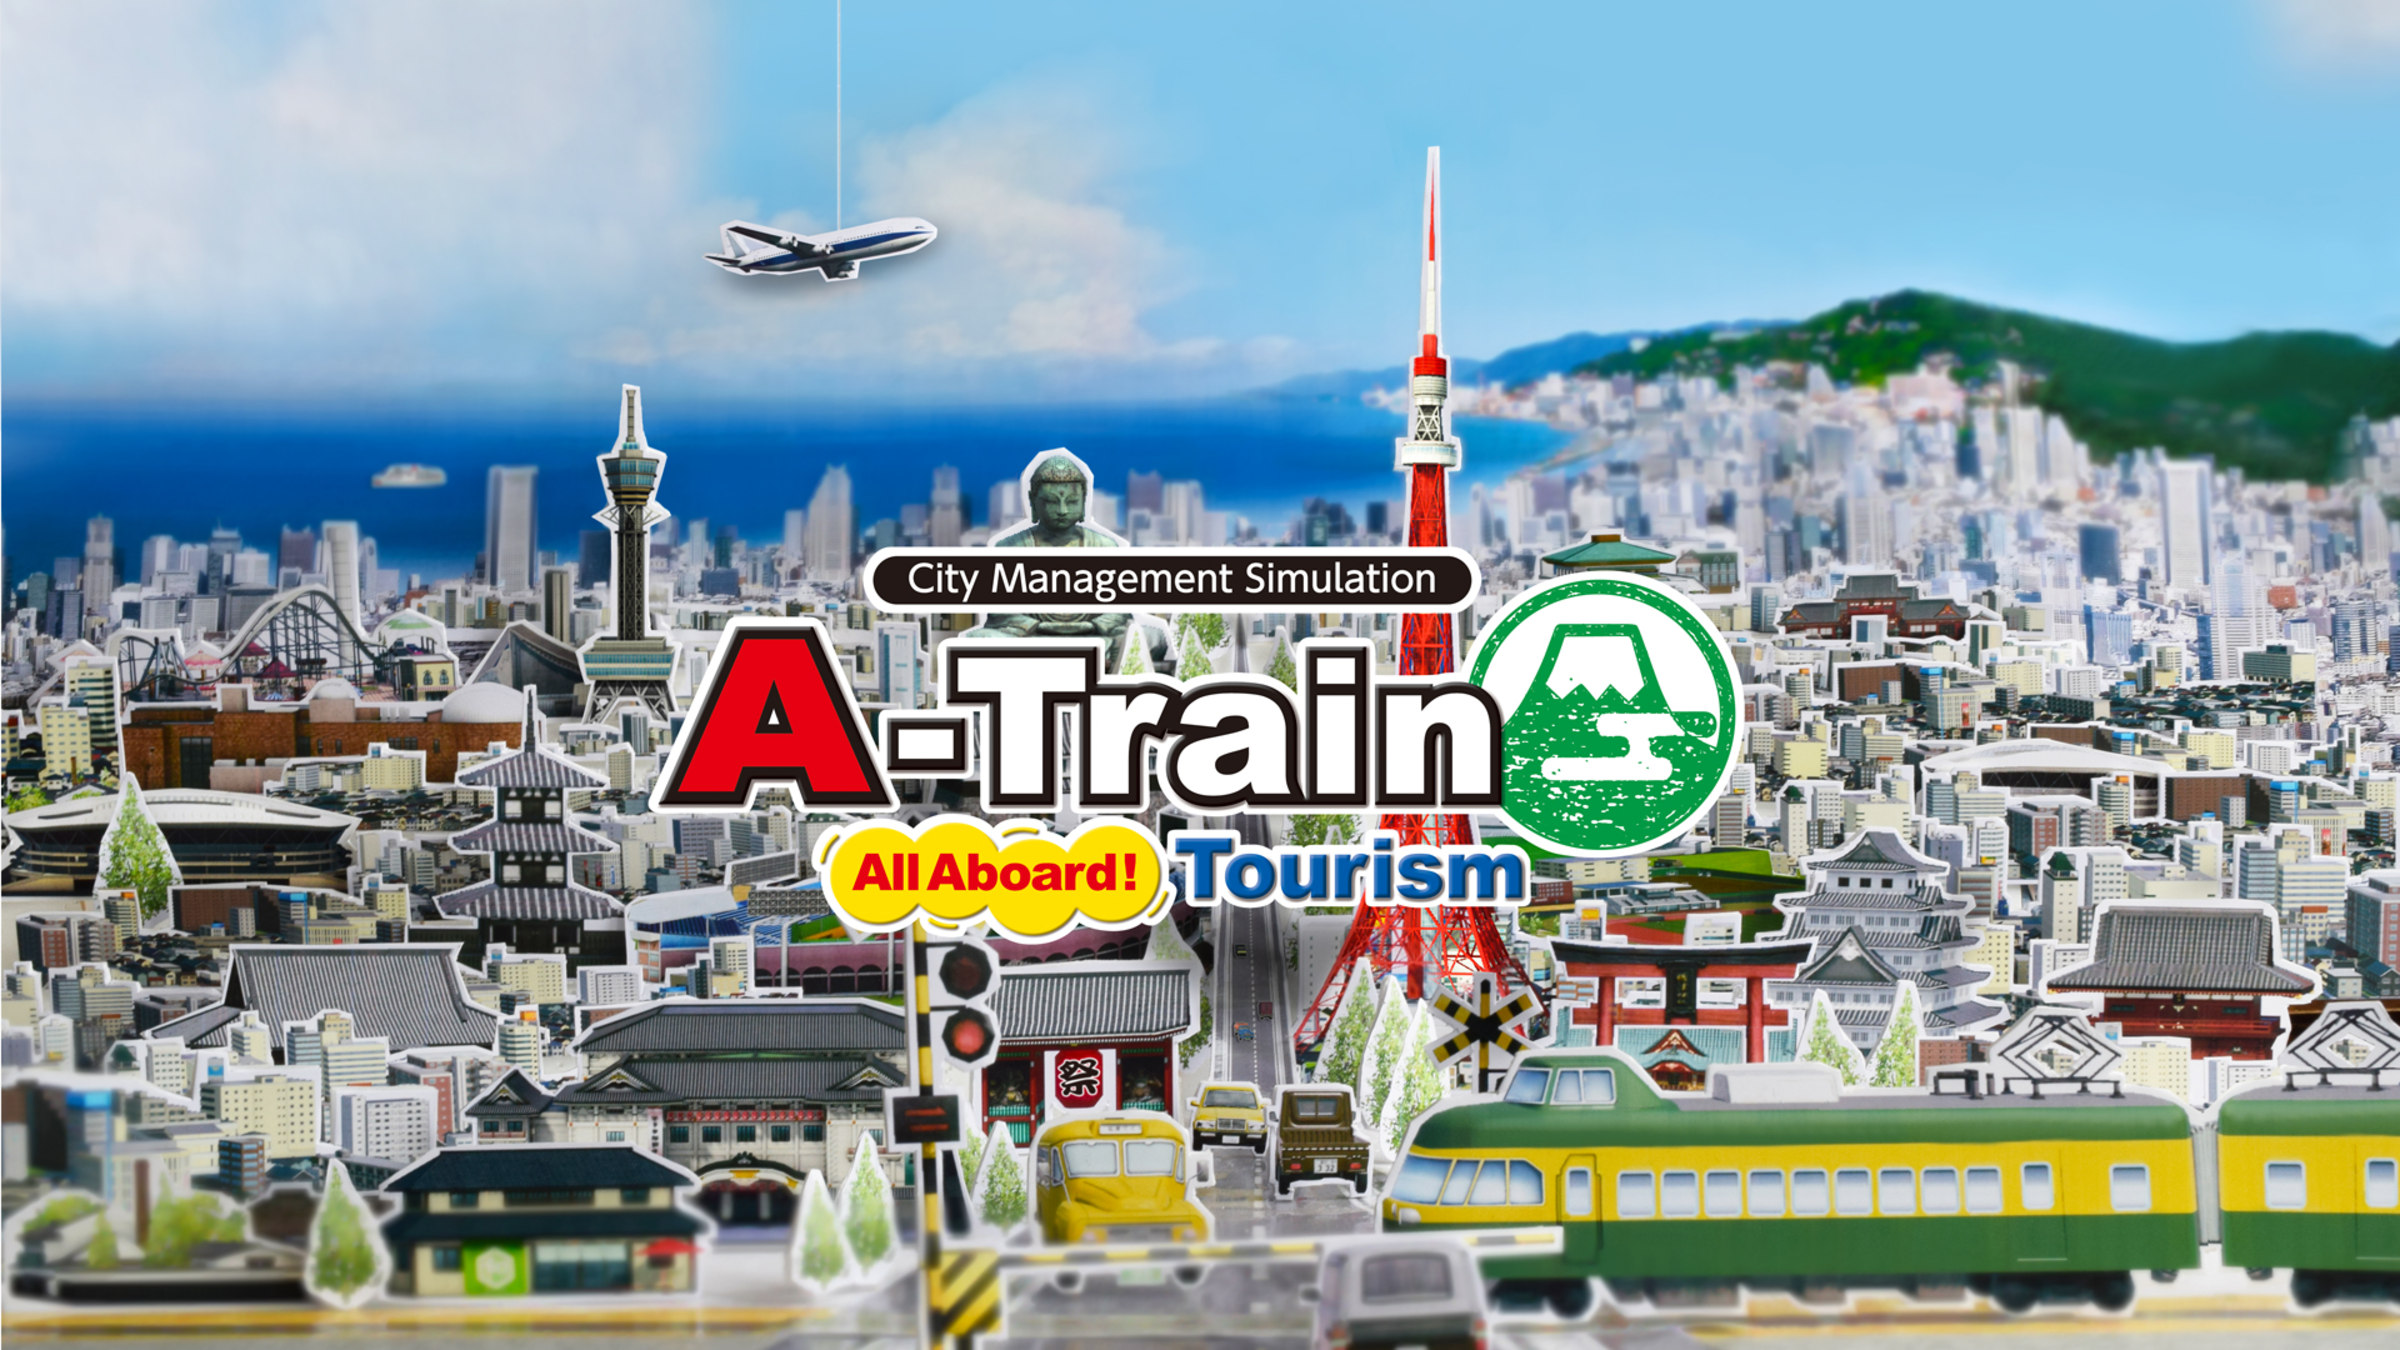 Site - Aboard! for All Tourism Nintendo A-Train: Switch Nintendo Official